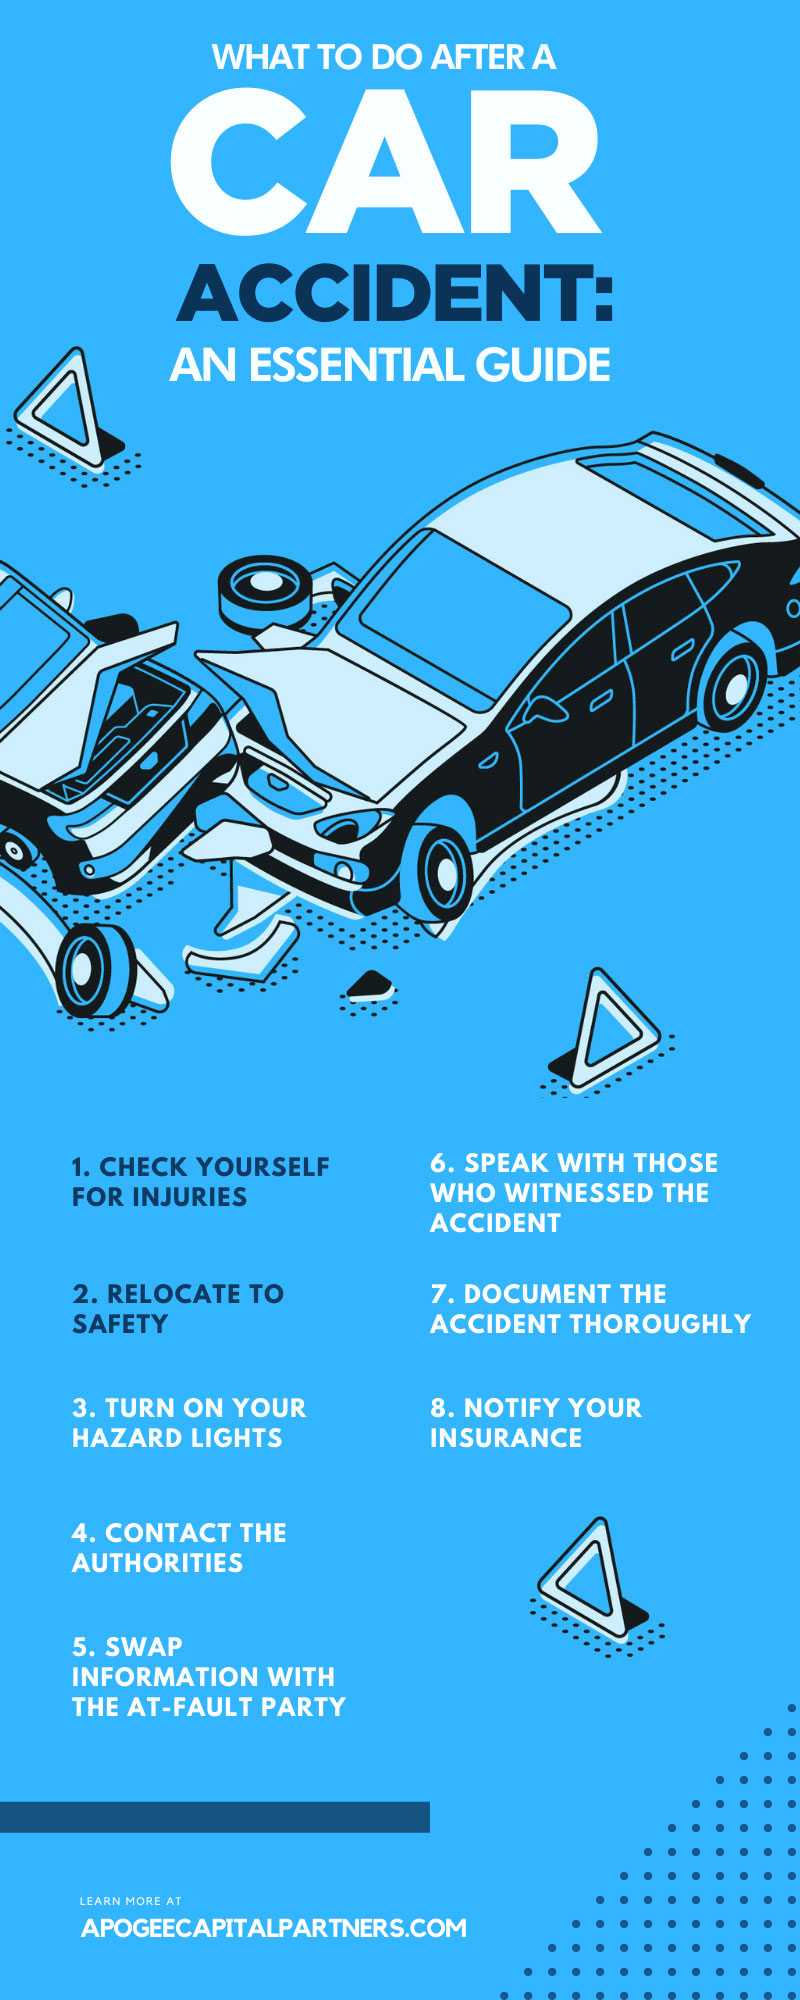 What To Do After a Car Accident: An Essential Guide